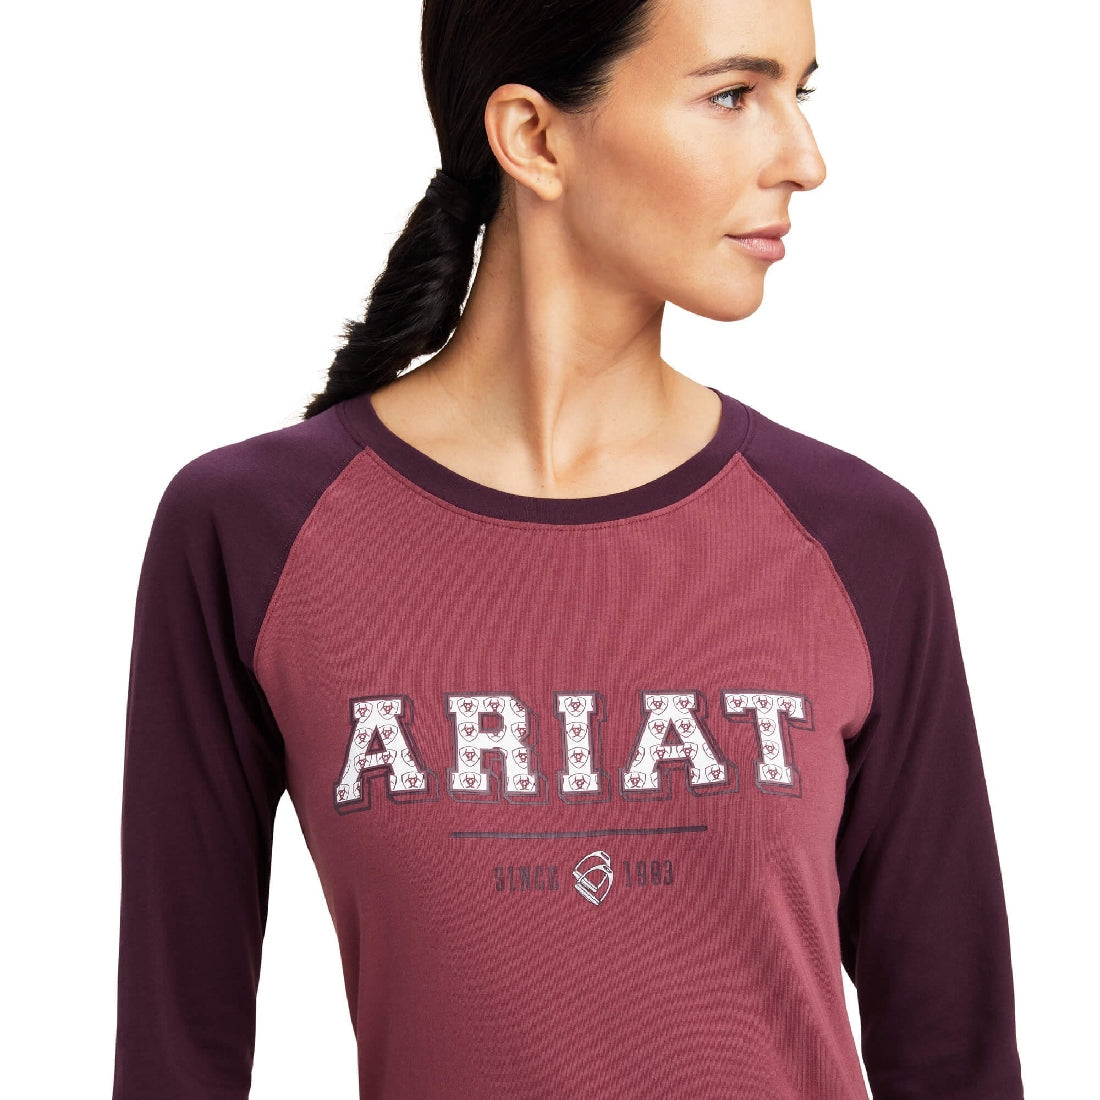 Tee Shirt Ariat Varsity Long Sleeve Mulberry/pink A23 Ladies-Ascot Saddlery-The Equestrian